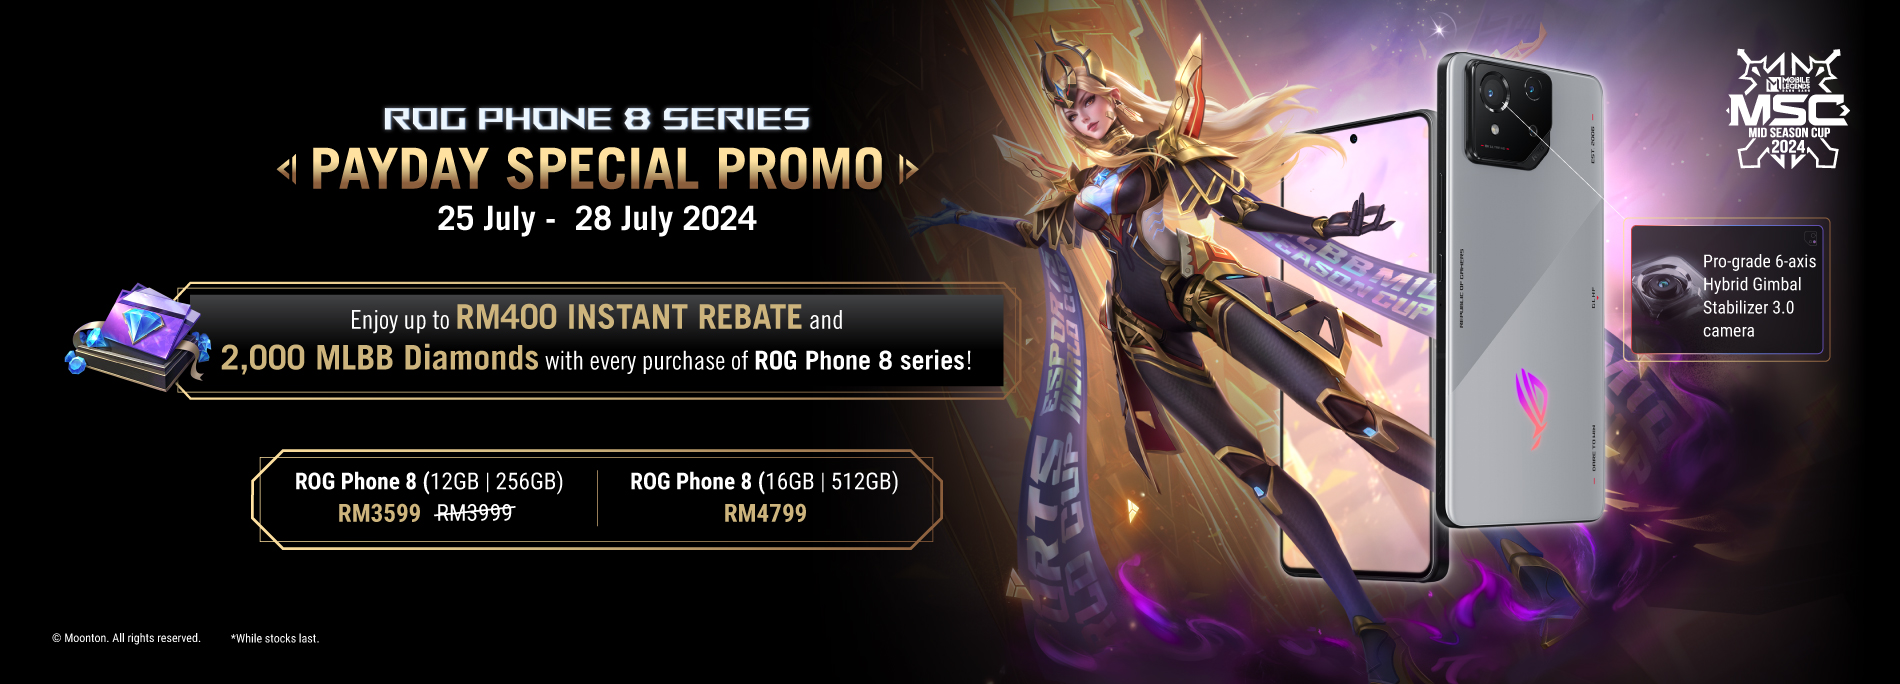 ROG Phone 8 Series: Payday Special Promo